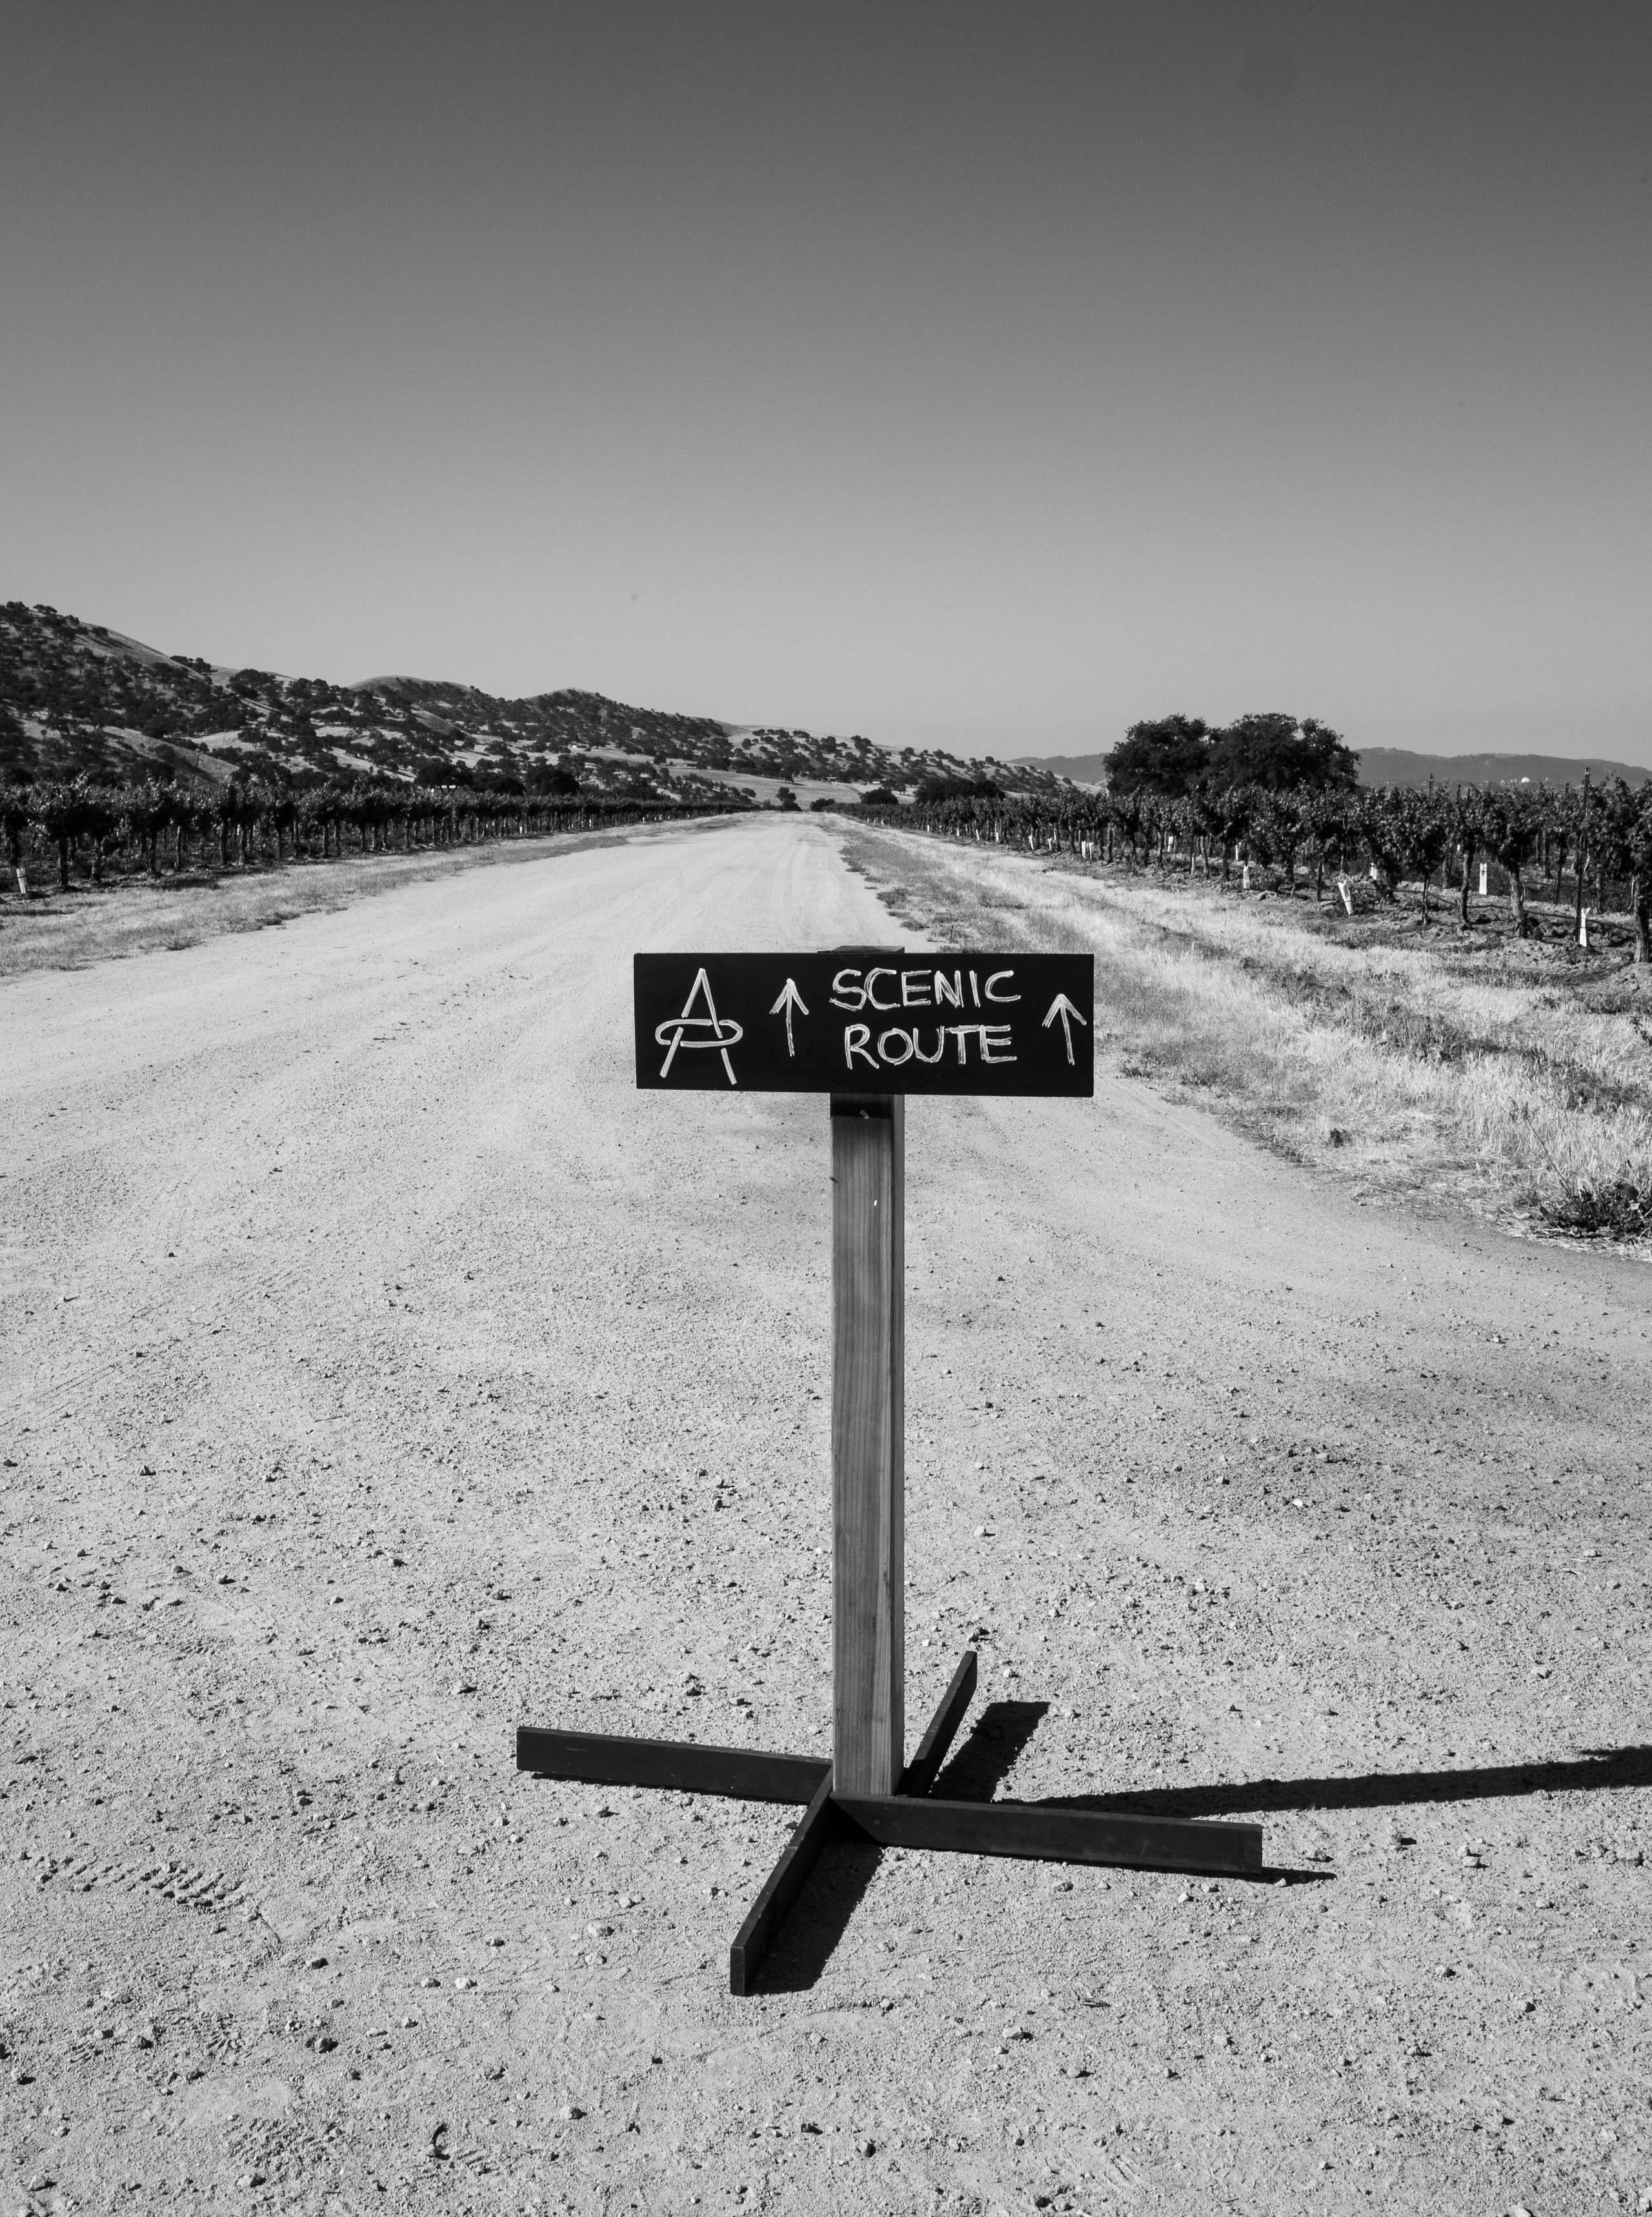 Black and white photo of gravel road with sign that says "Scenic Route"